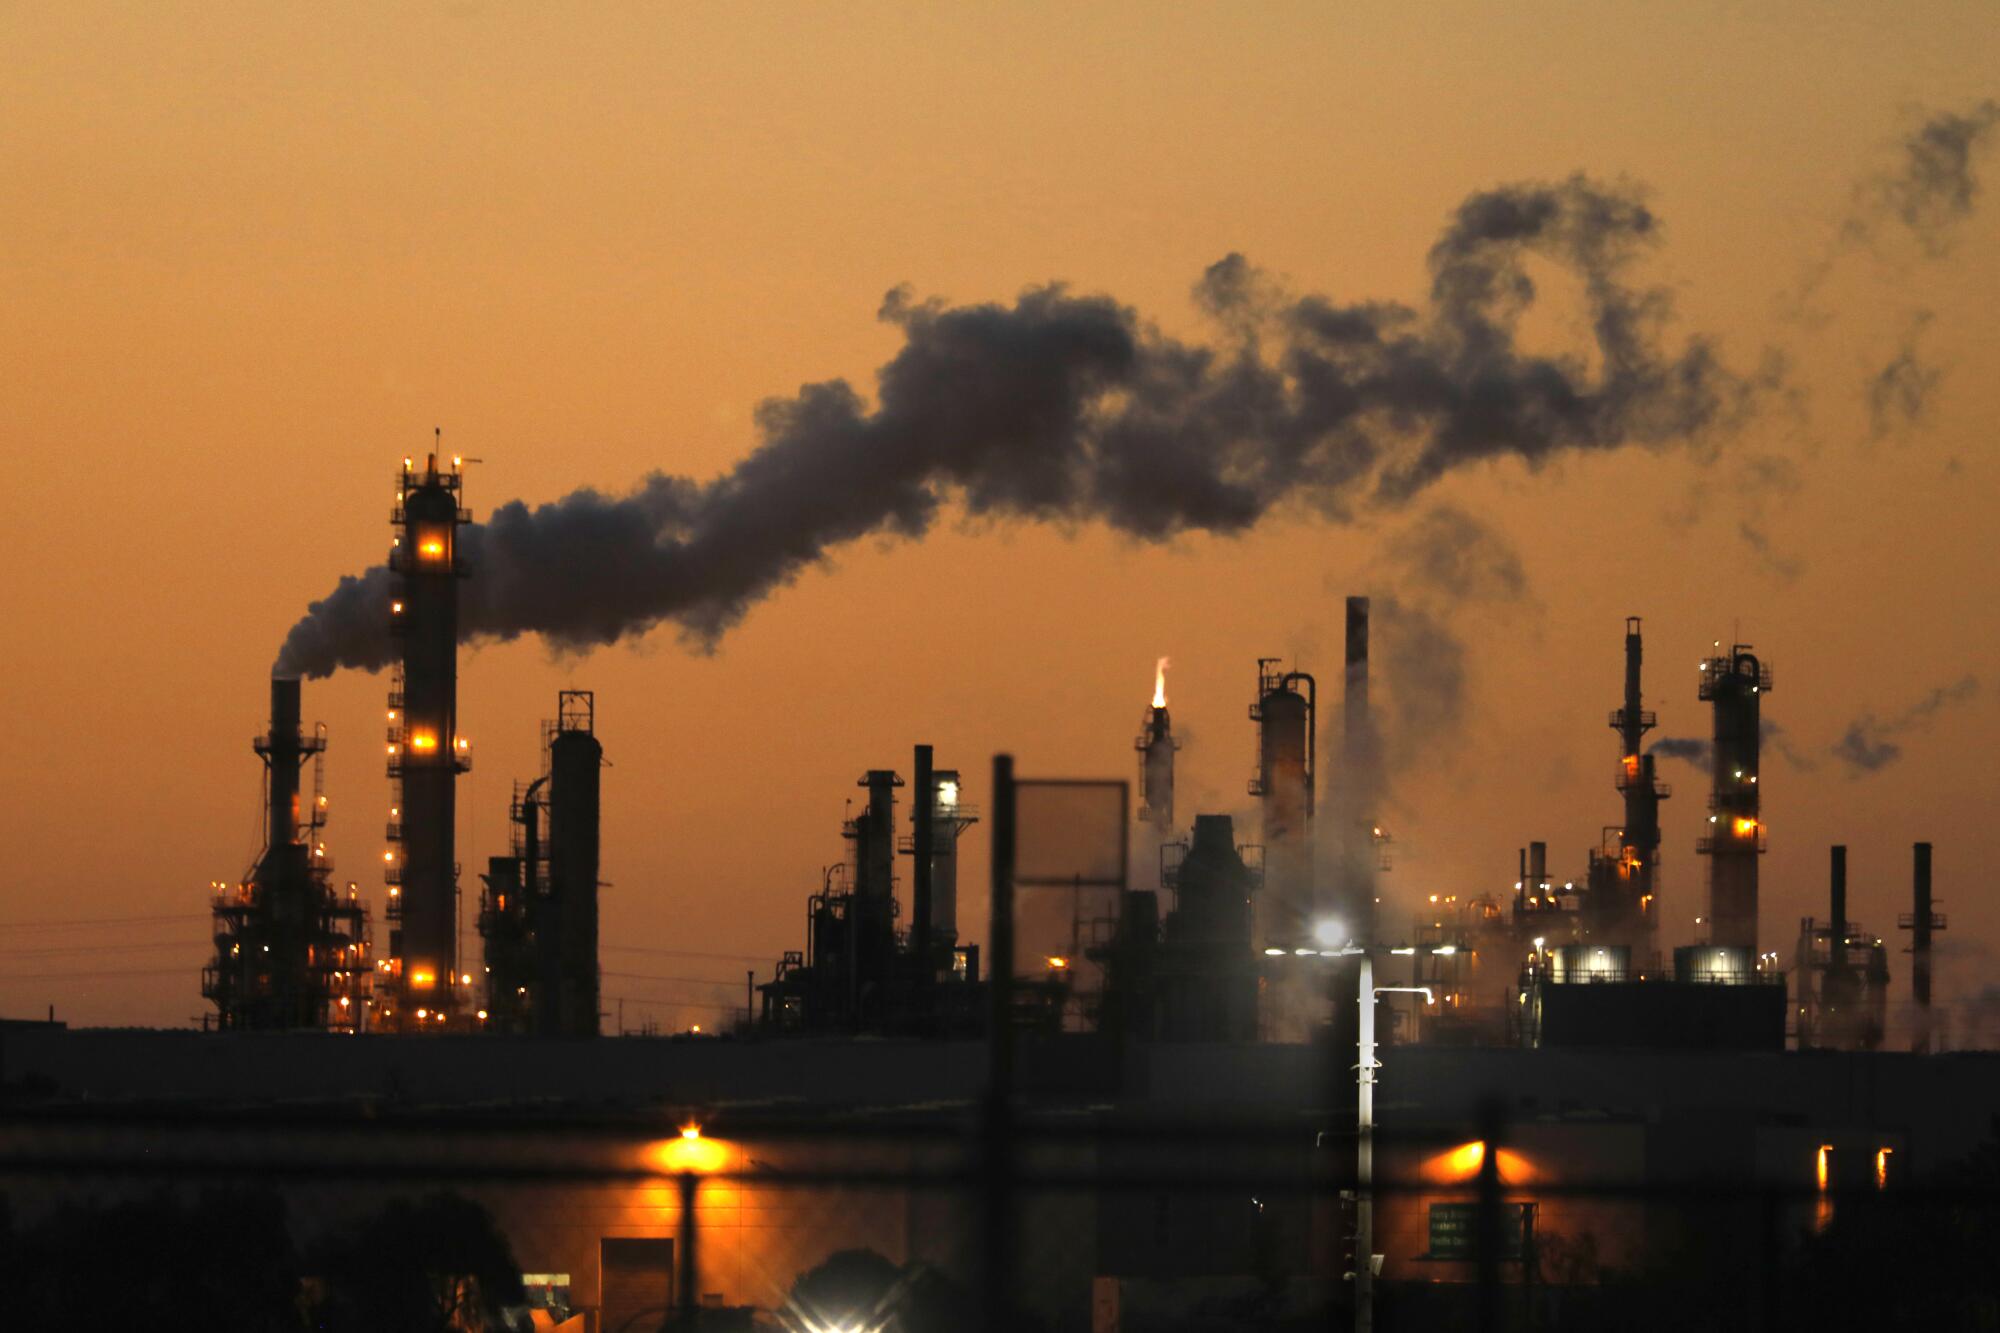 June 2021- photo of the Phillip 66 Los Angeles refinery in Wilmington.